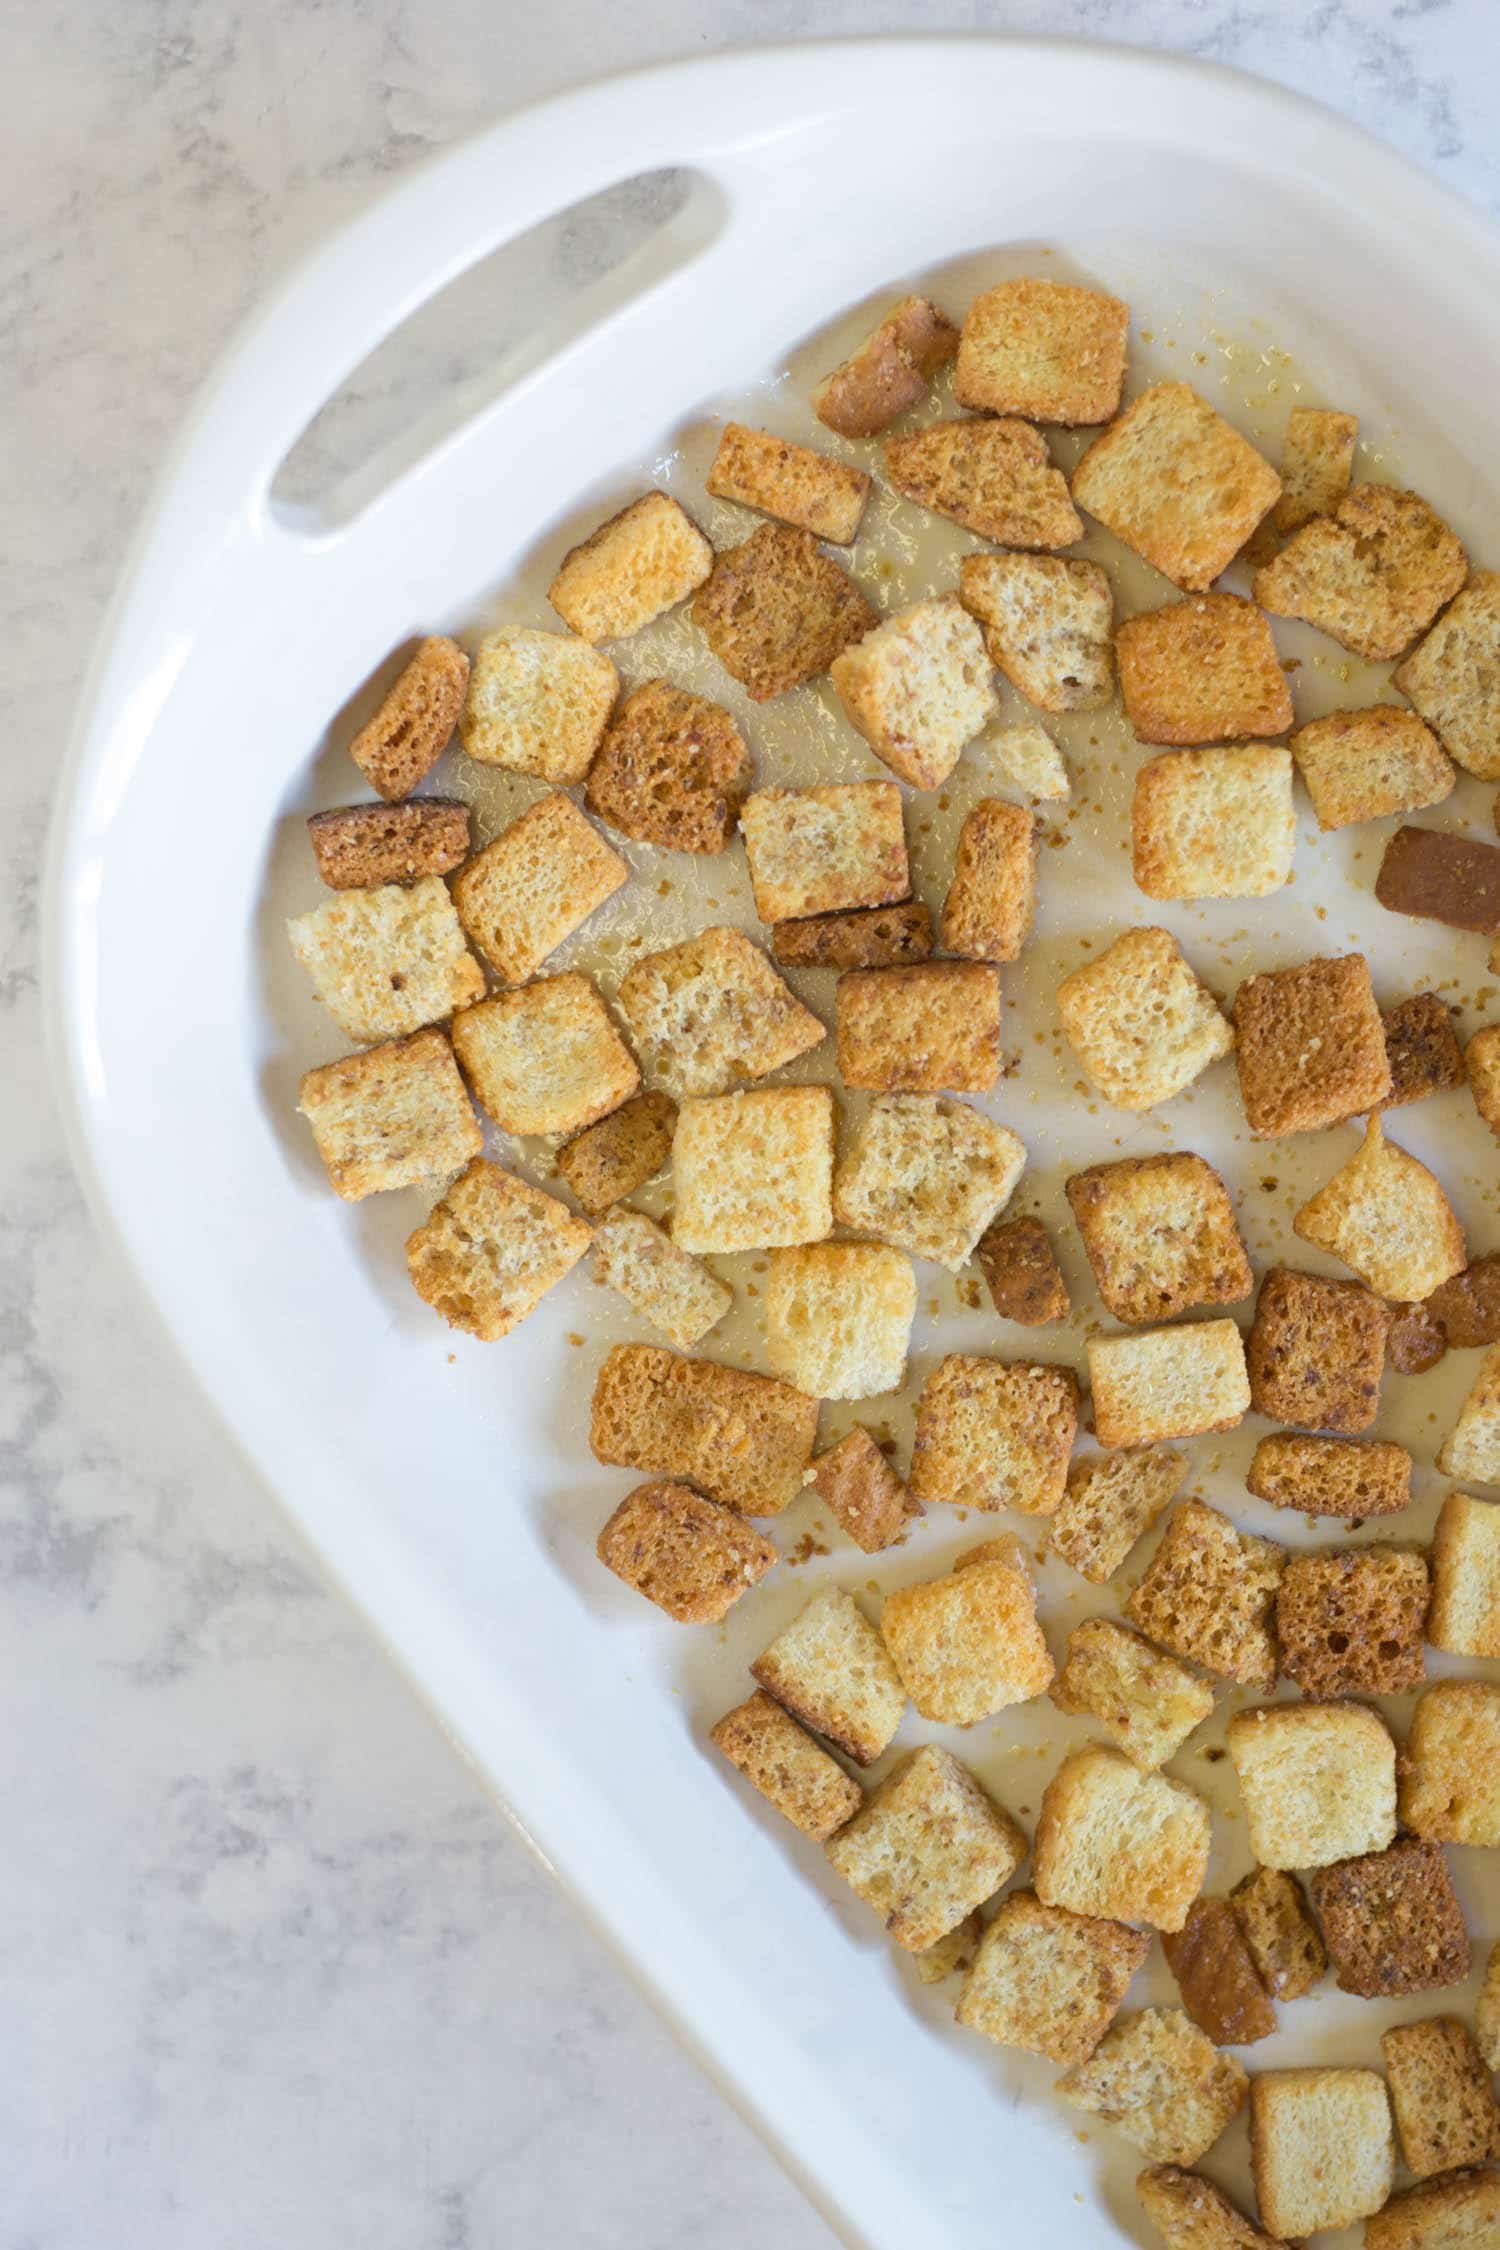 Dish with croutons